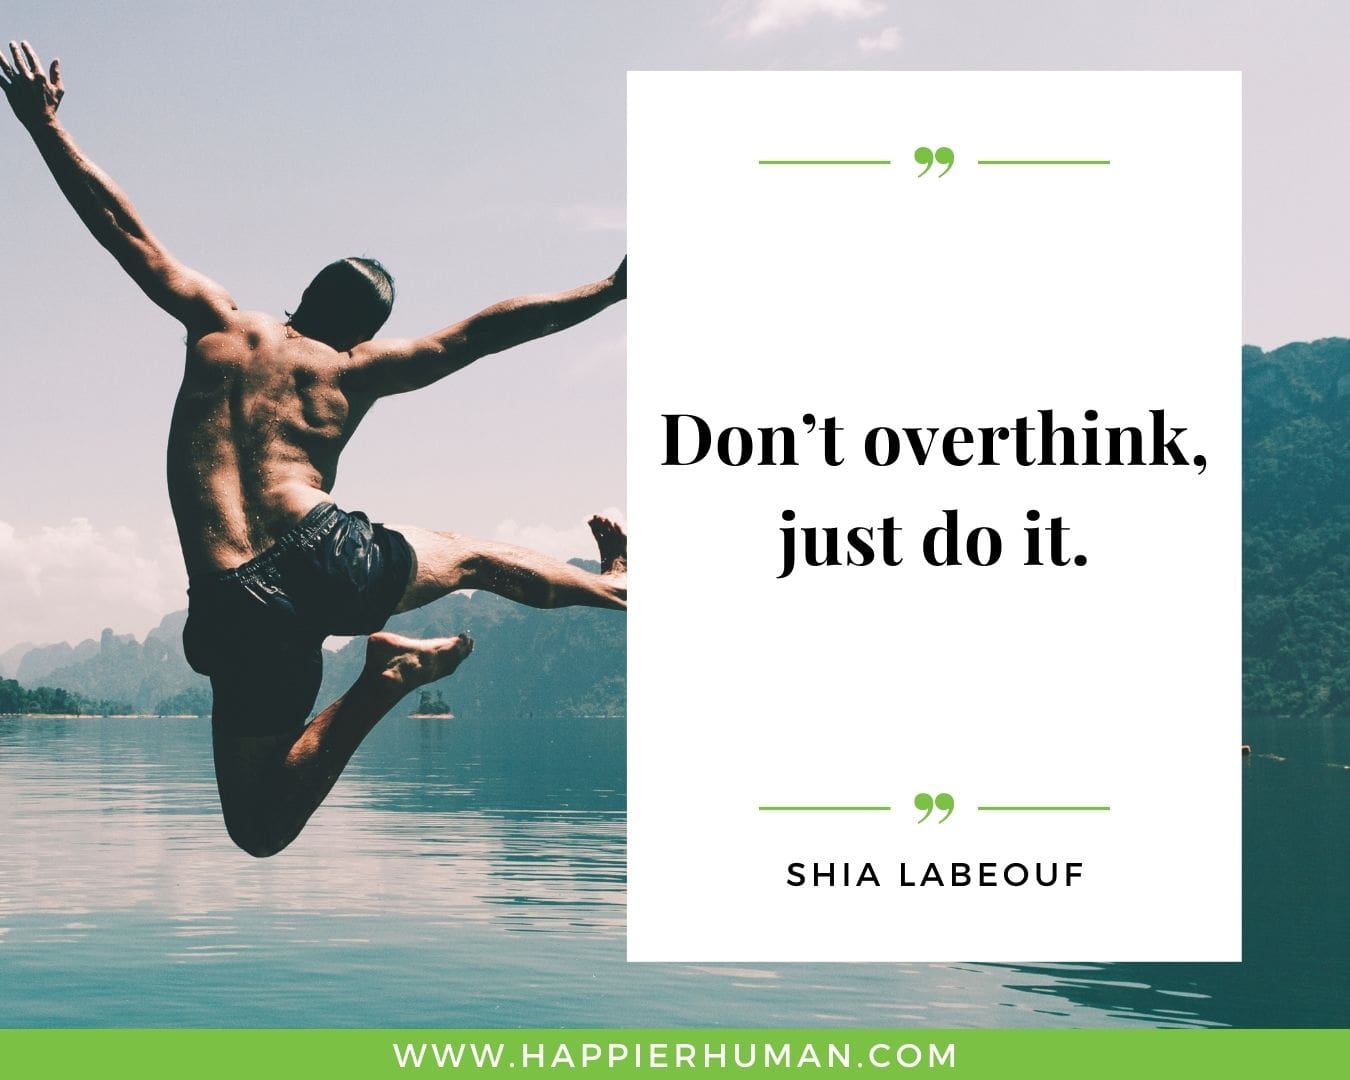 Overthinking Quotes - “Don’t overthink, just do it.” – Shia LaBeouf